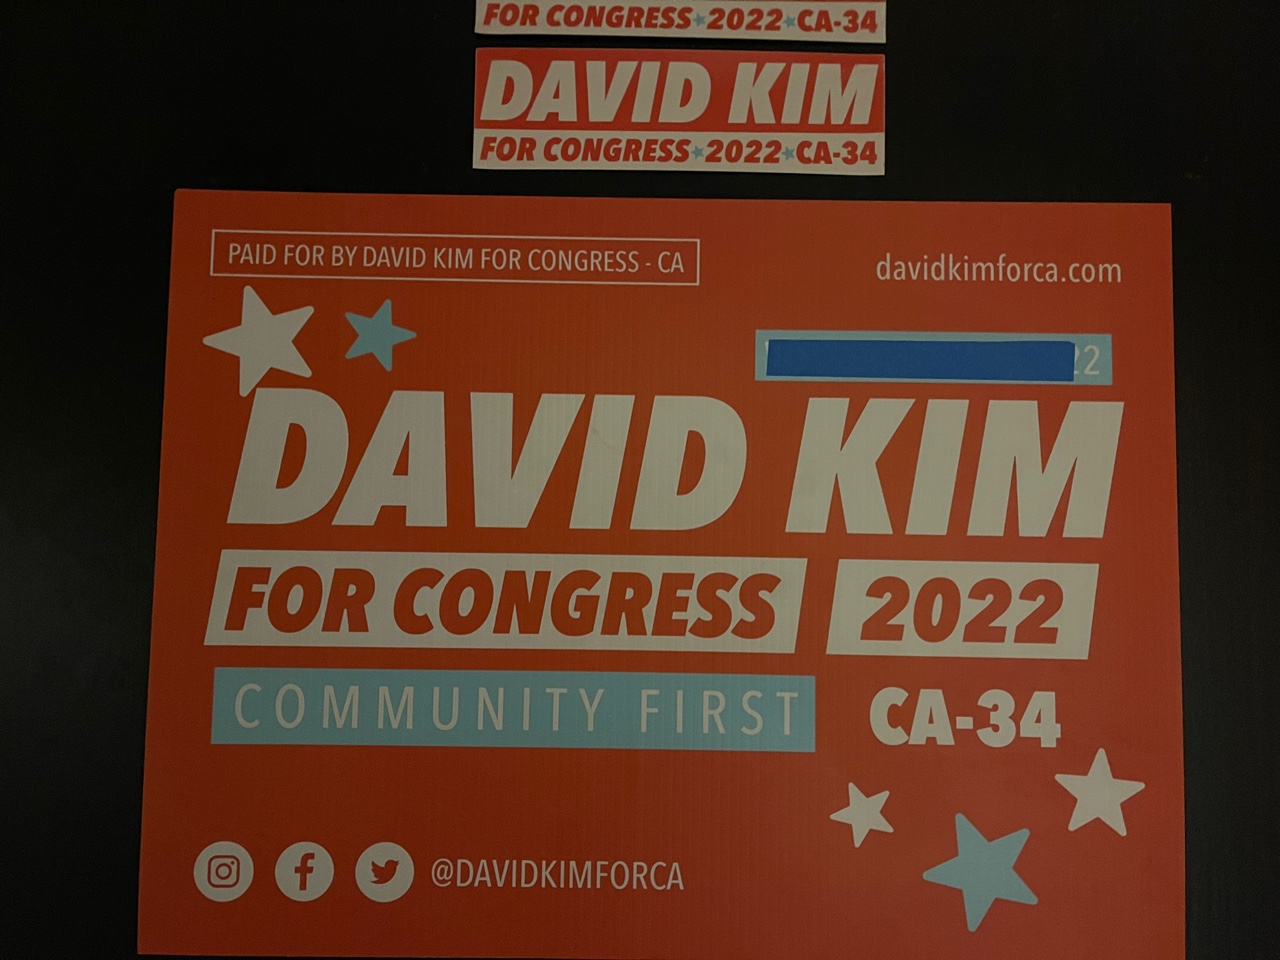 David Kim’s promotional campaign material